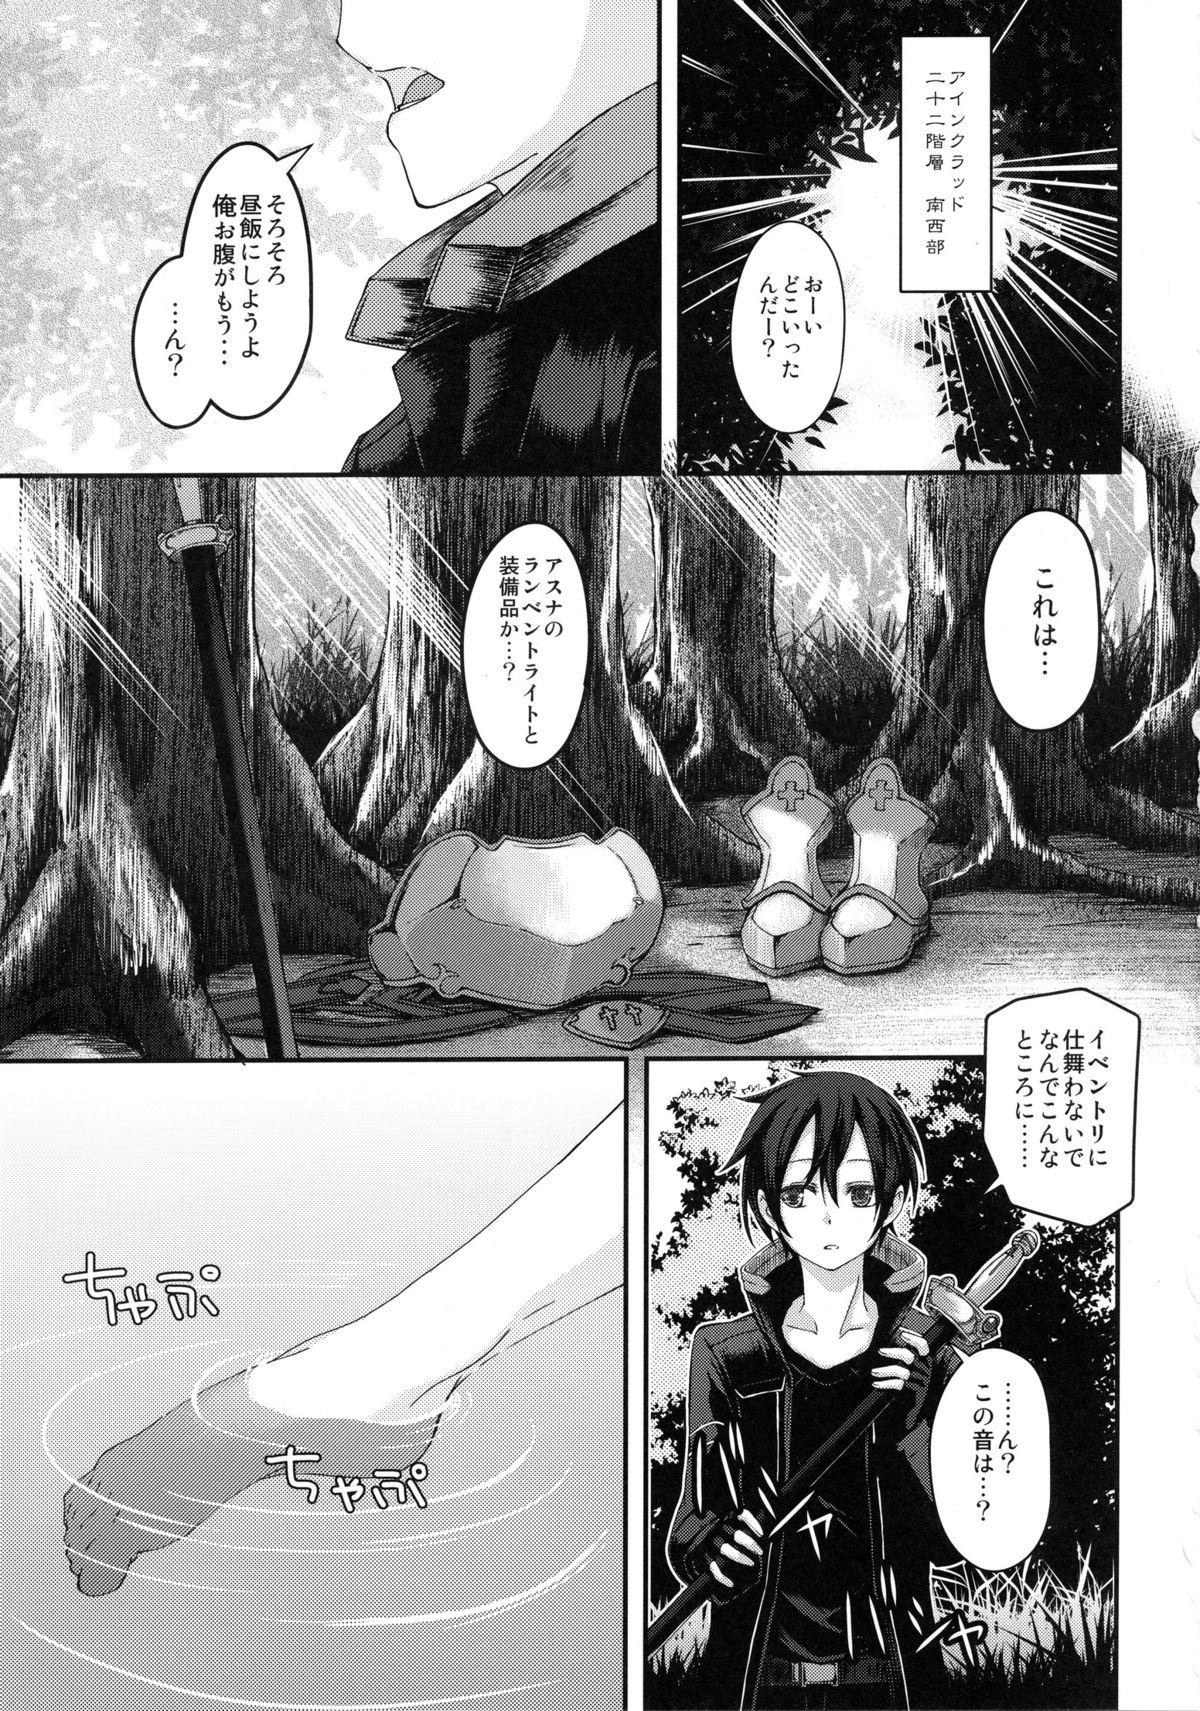 Pica Marriage Experience - Sword art online Freak - Page 2